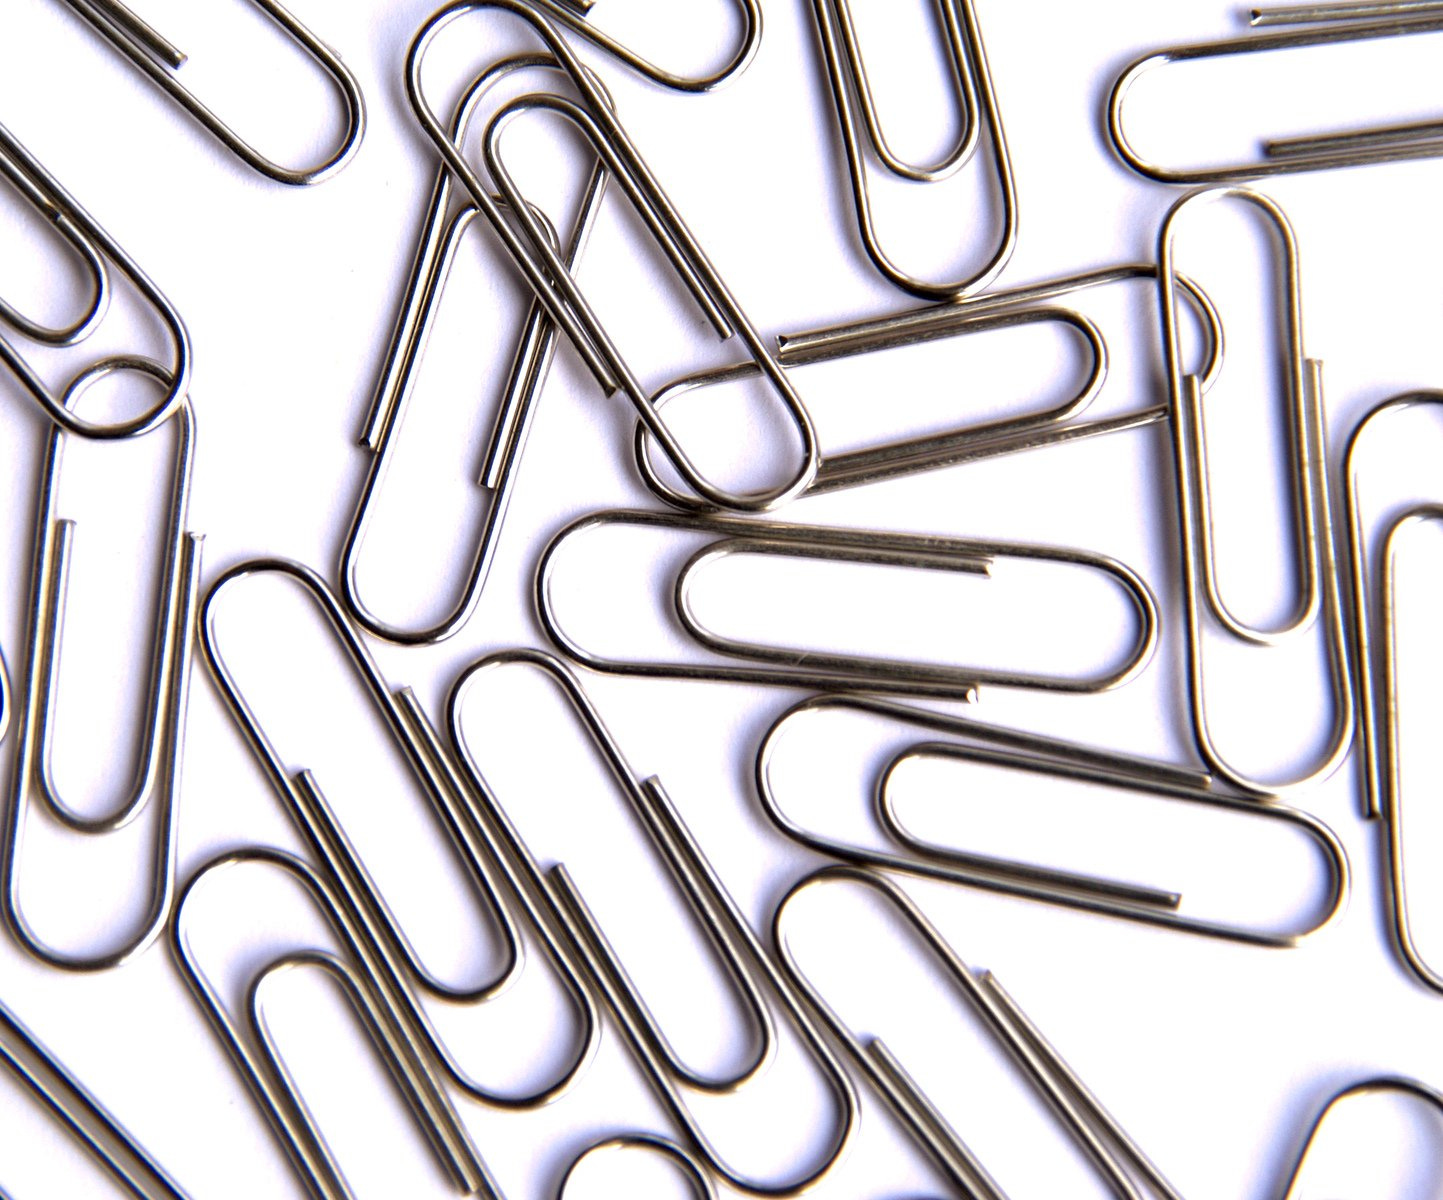 Paper Clips Free Photo Download | FreeImages